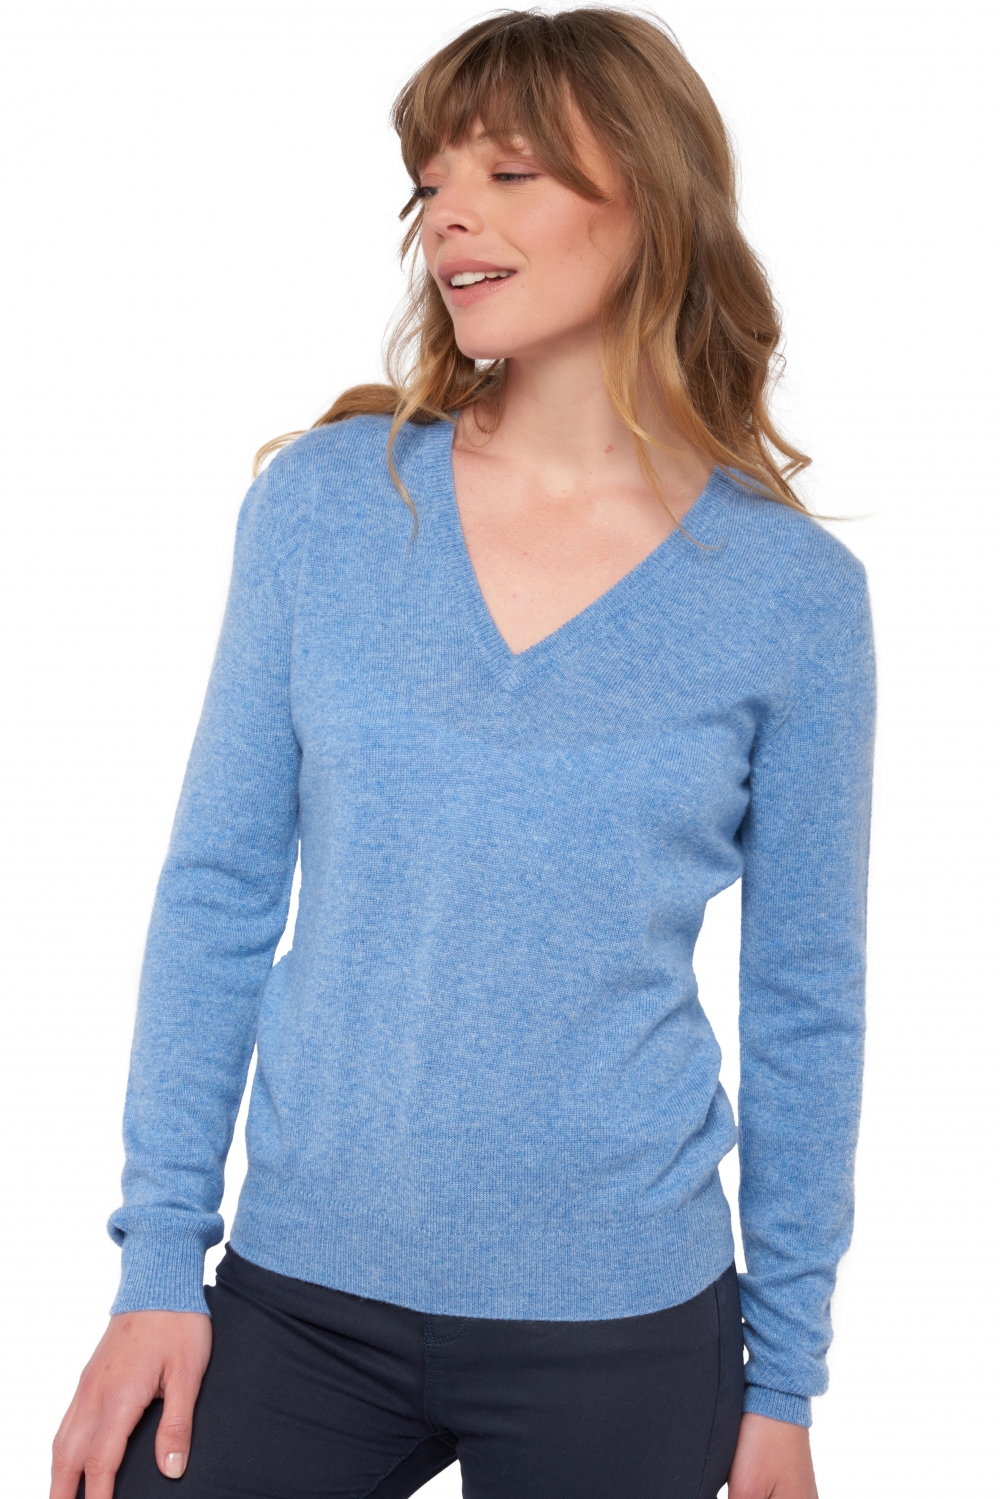 Cashmere ladies timeless classics faustine mirage xl